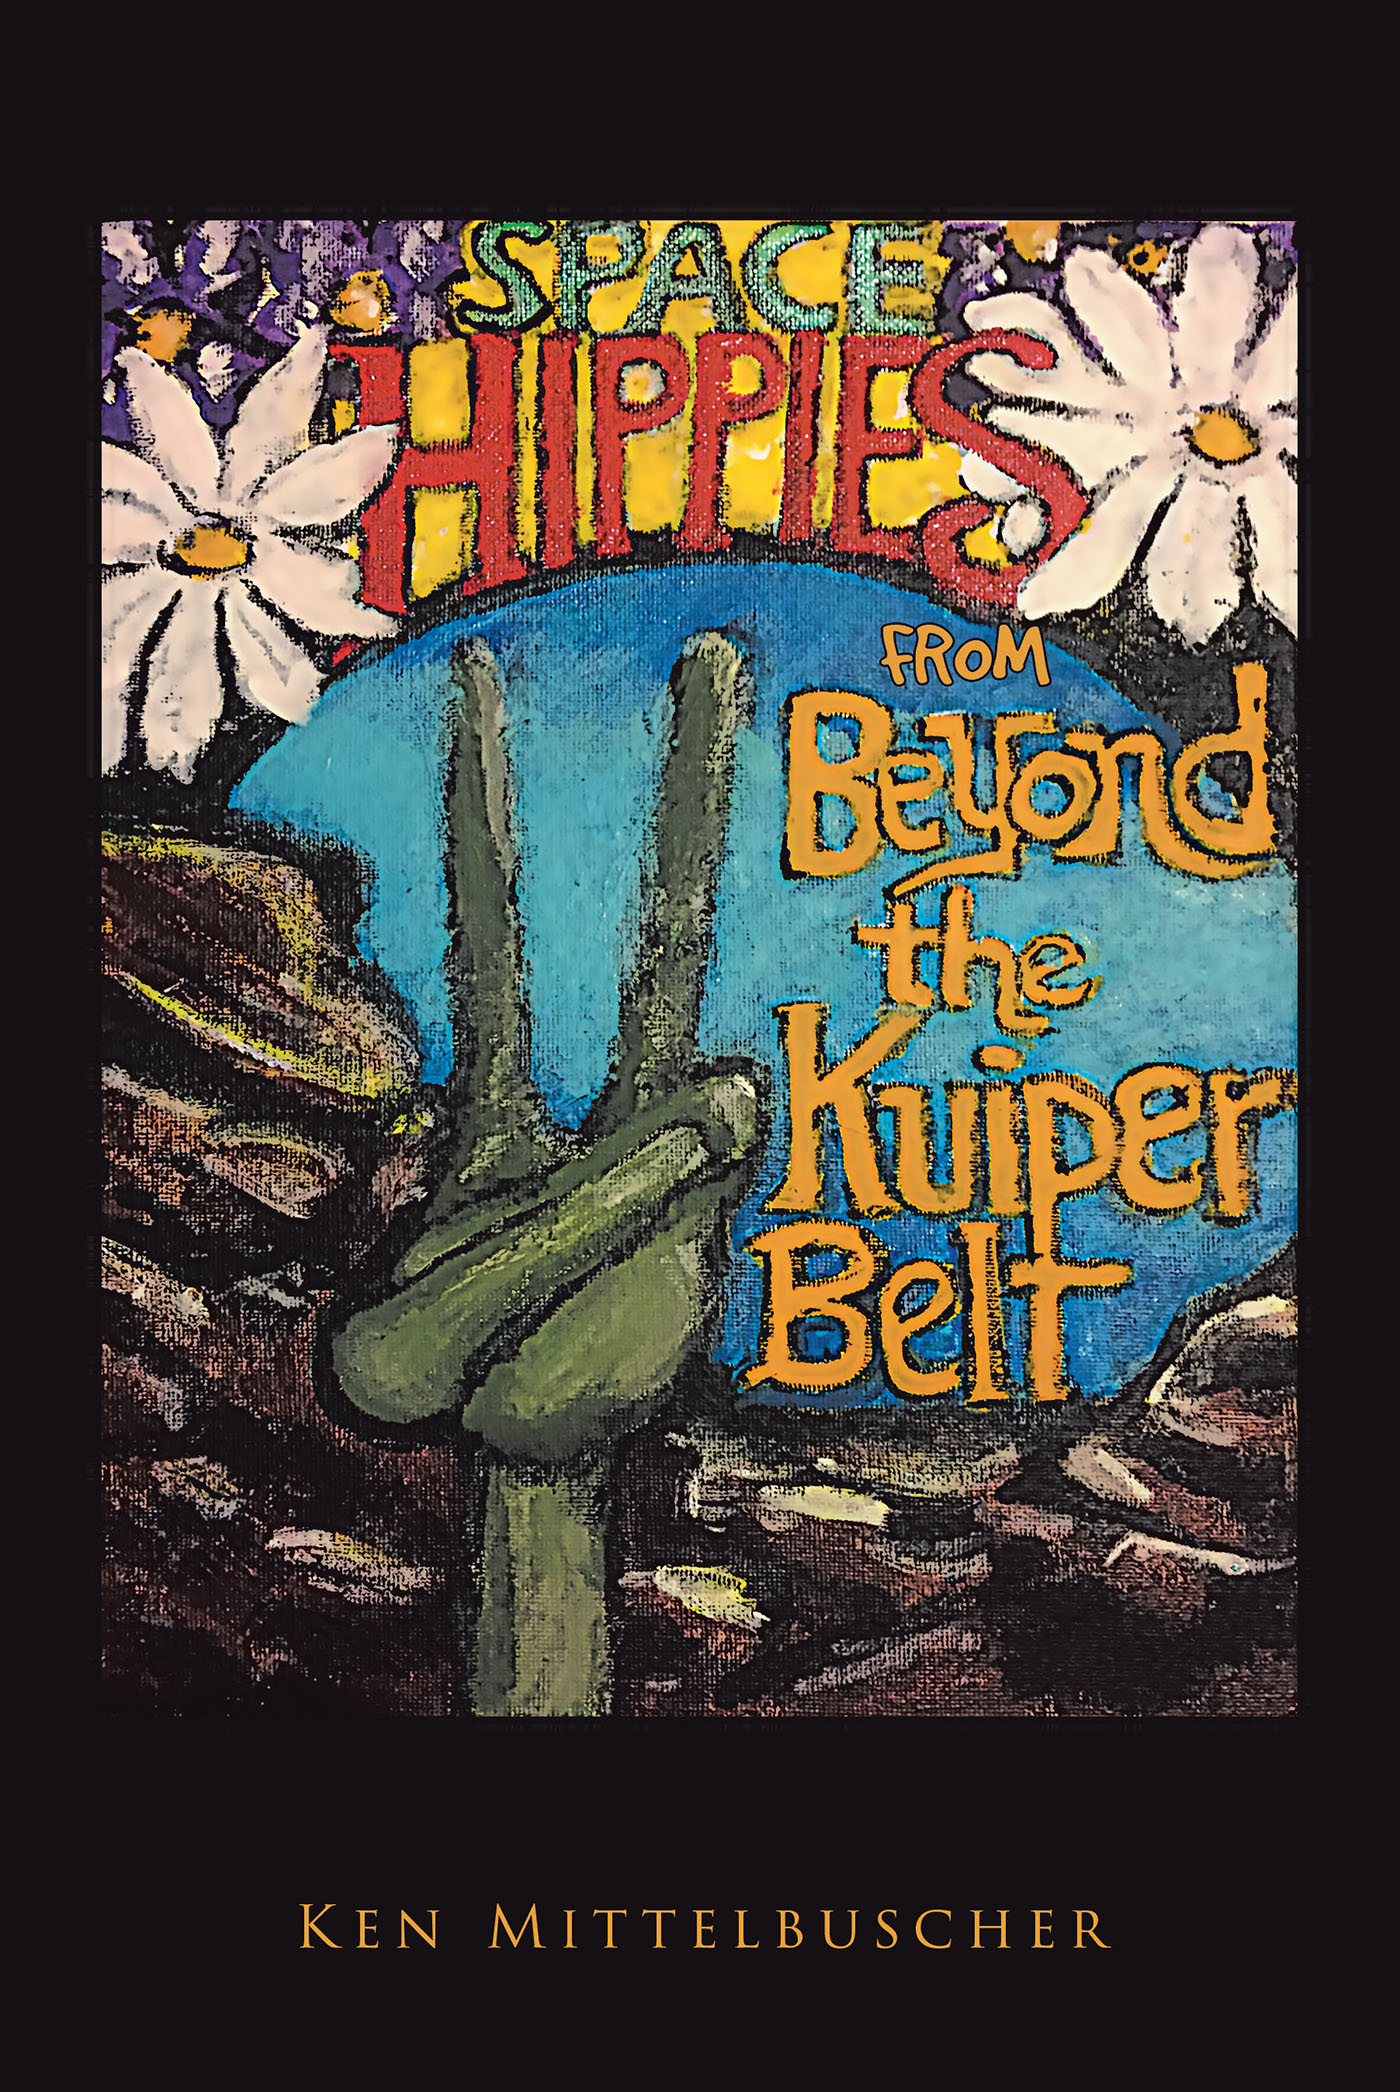 Ken Mittelbuscher’s New Book, “Space Hippies: From Beyond the Kuiper Belt,” Follows Five Hippies That Are Abducted by Aliens and Work with Them to Save Both Their Planet